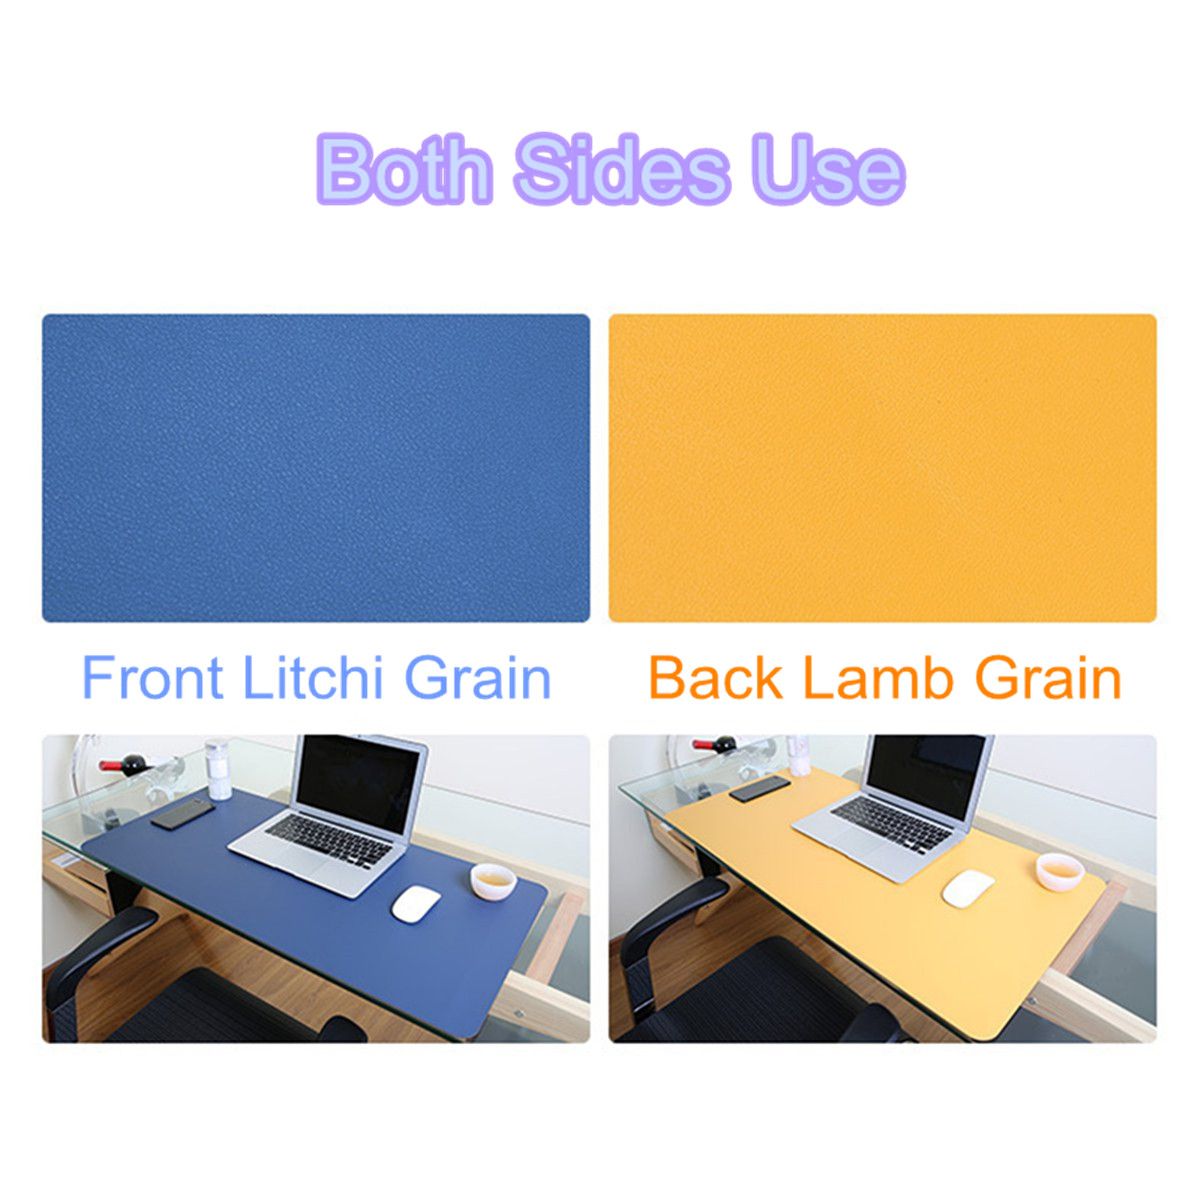 80x40cm-Both-Sides-Two-Colors-Extended-PU-leather-Mouse-Pad-Mat-Large-Office-Gaming-Desk-Mat-1273768